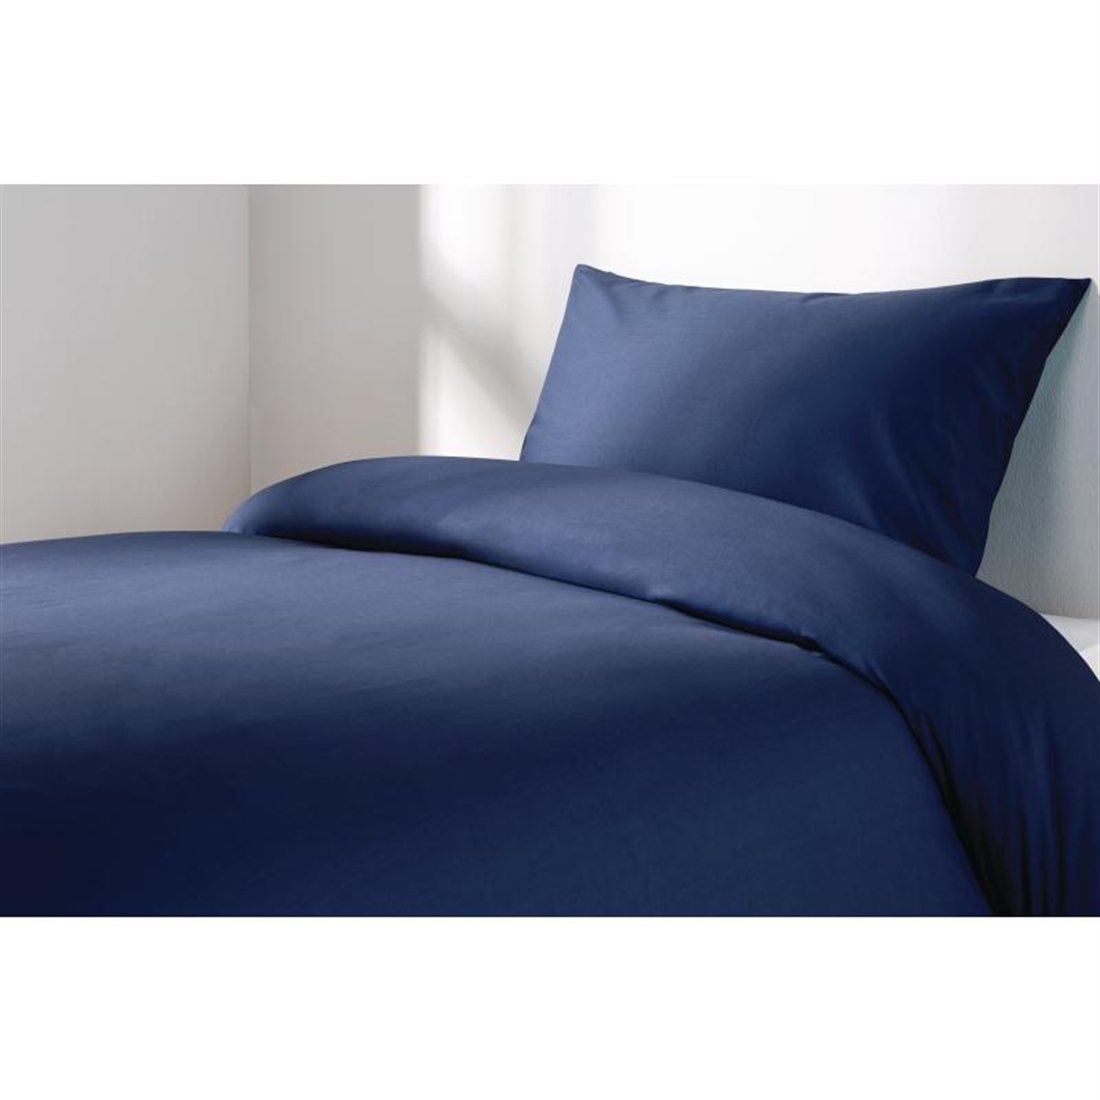 Mitre Essentials Spectrum Fitted Sheet Navy Metric Single